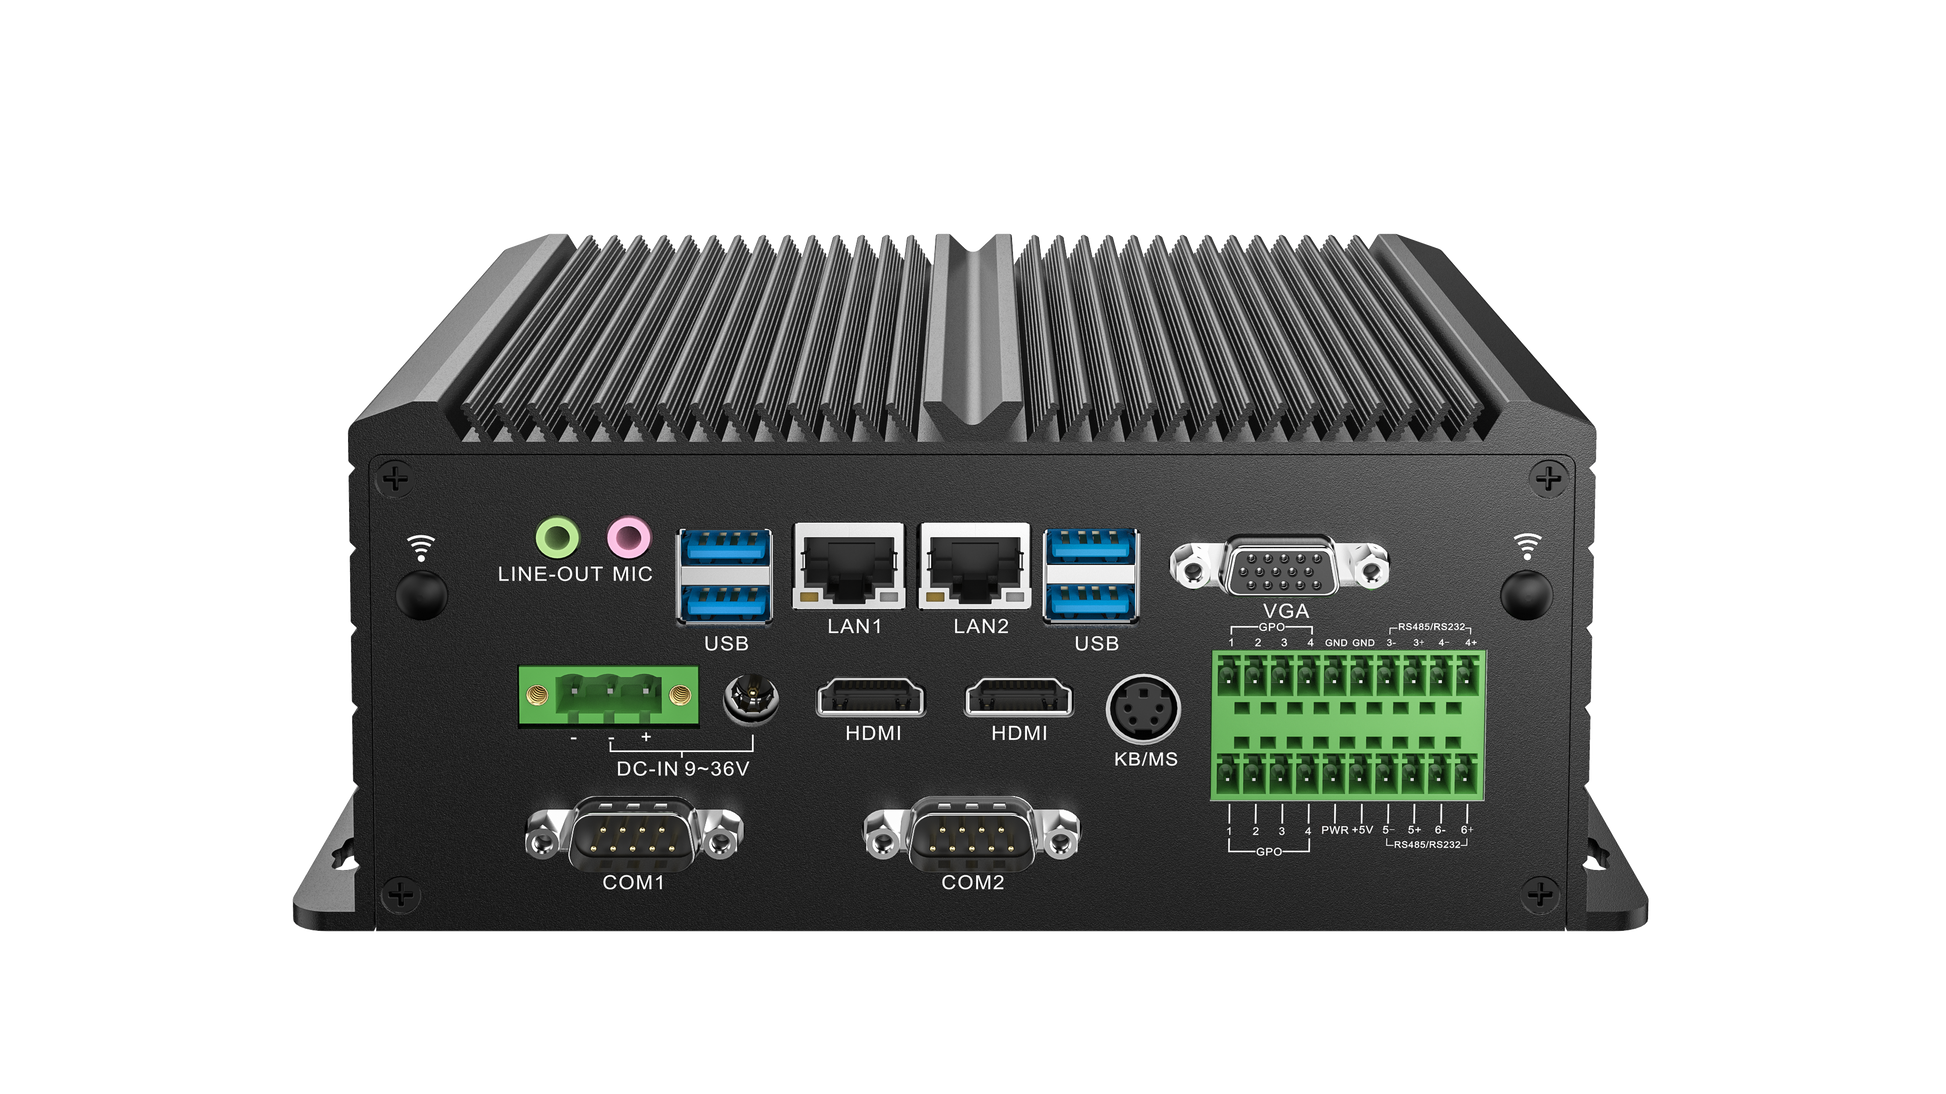 Darveen MBC-3200 Intel Core I7 Fanless Industrial Embedded Box Computer